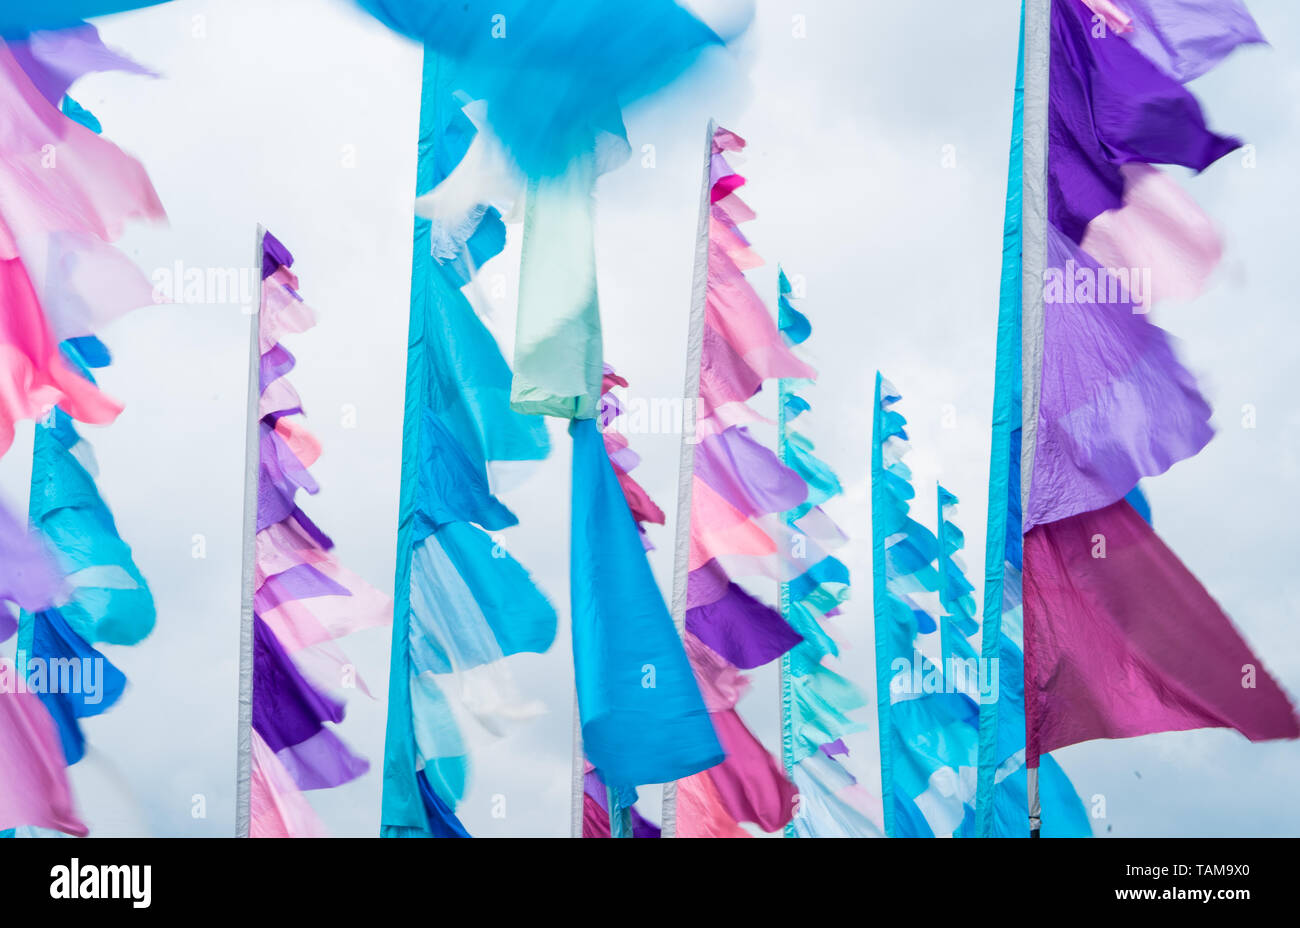 Pastel coloured festival flags. Tall poles with pink, turquoise and white flags at the River Cottage Food Fair, 2019 Stock Photo